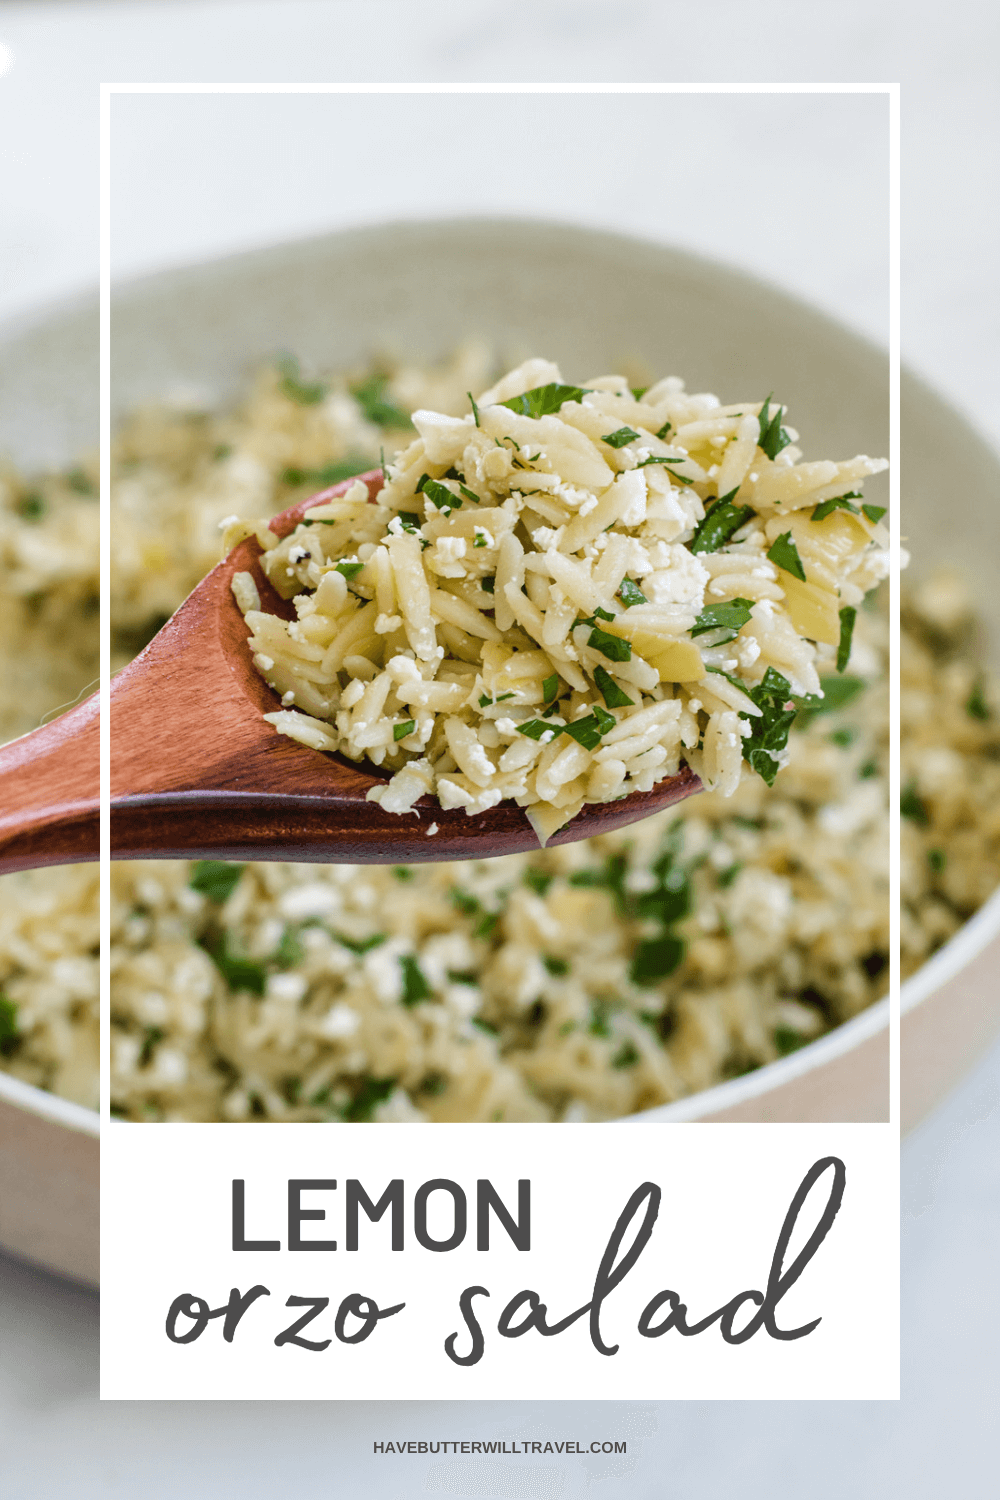 This lemon orzo salad is the perfect side dish for any meal, whether you're entertaining outside with friends or enjoying a family dinner at home.